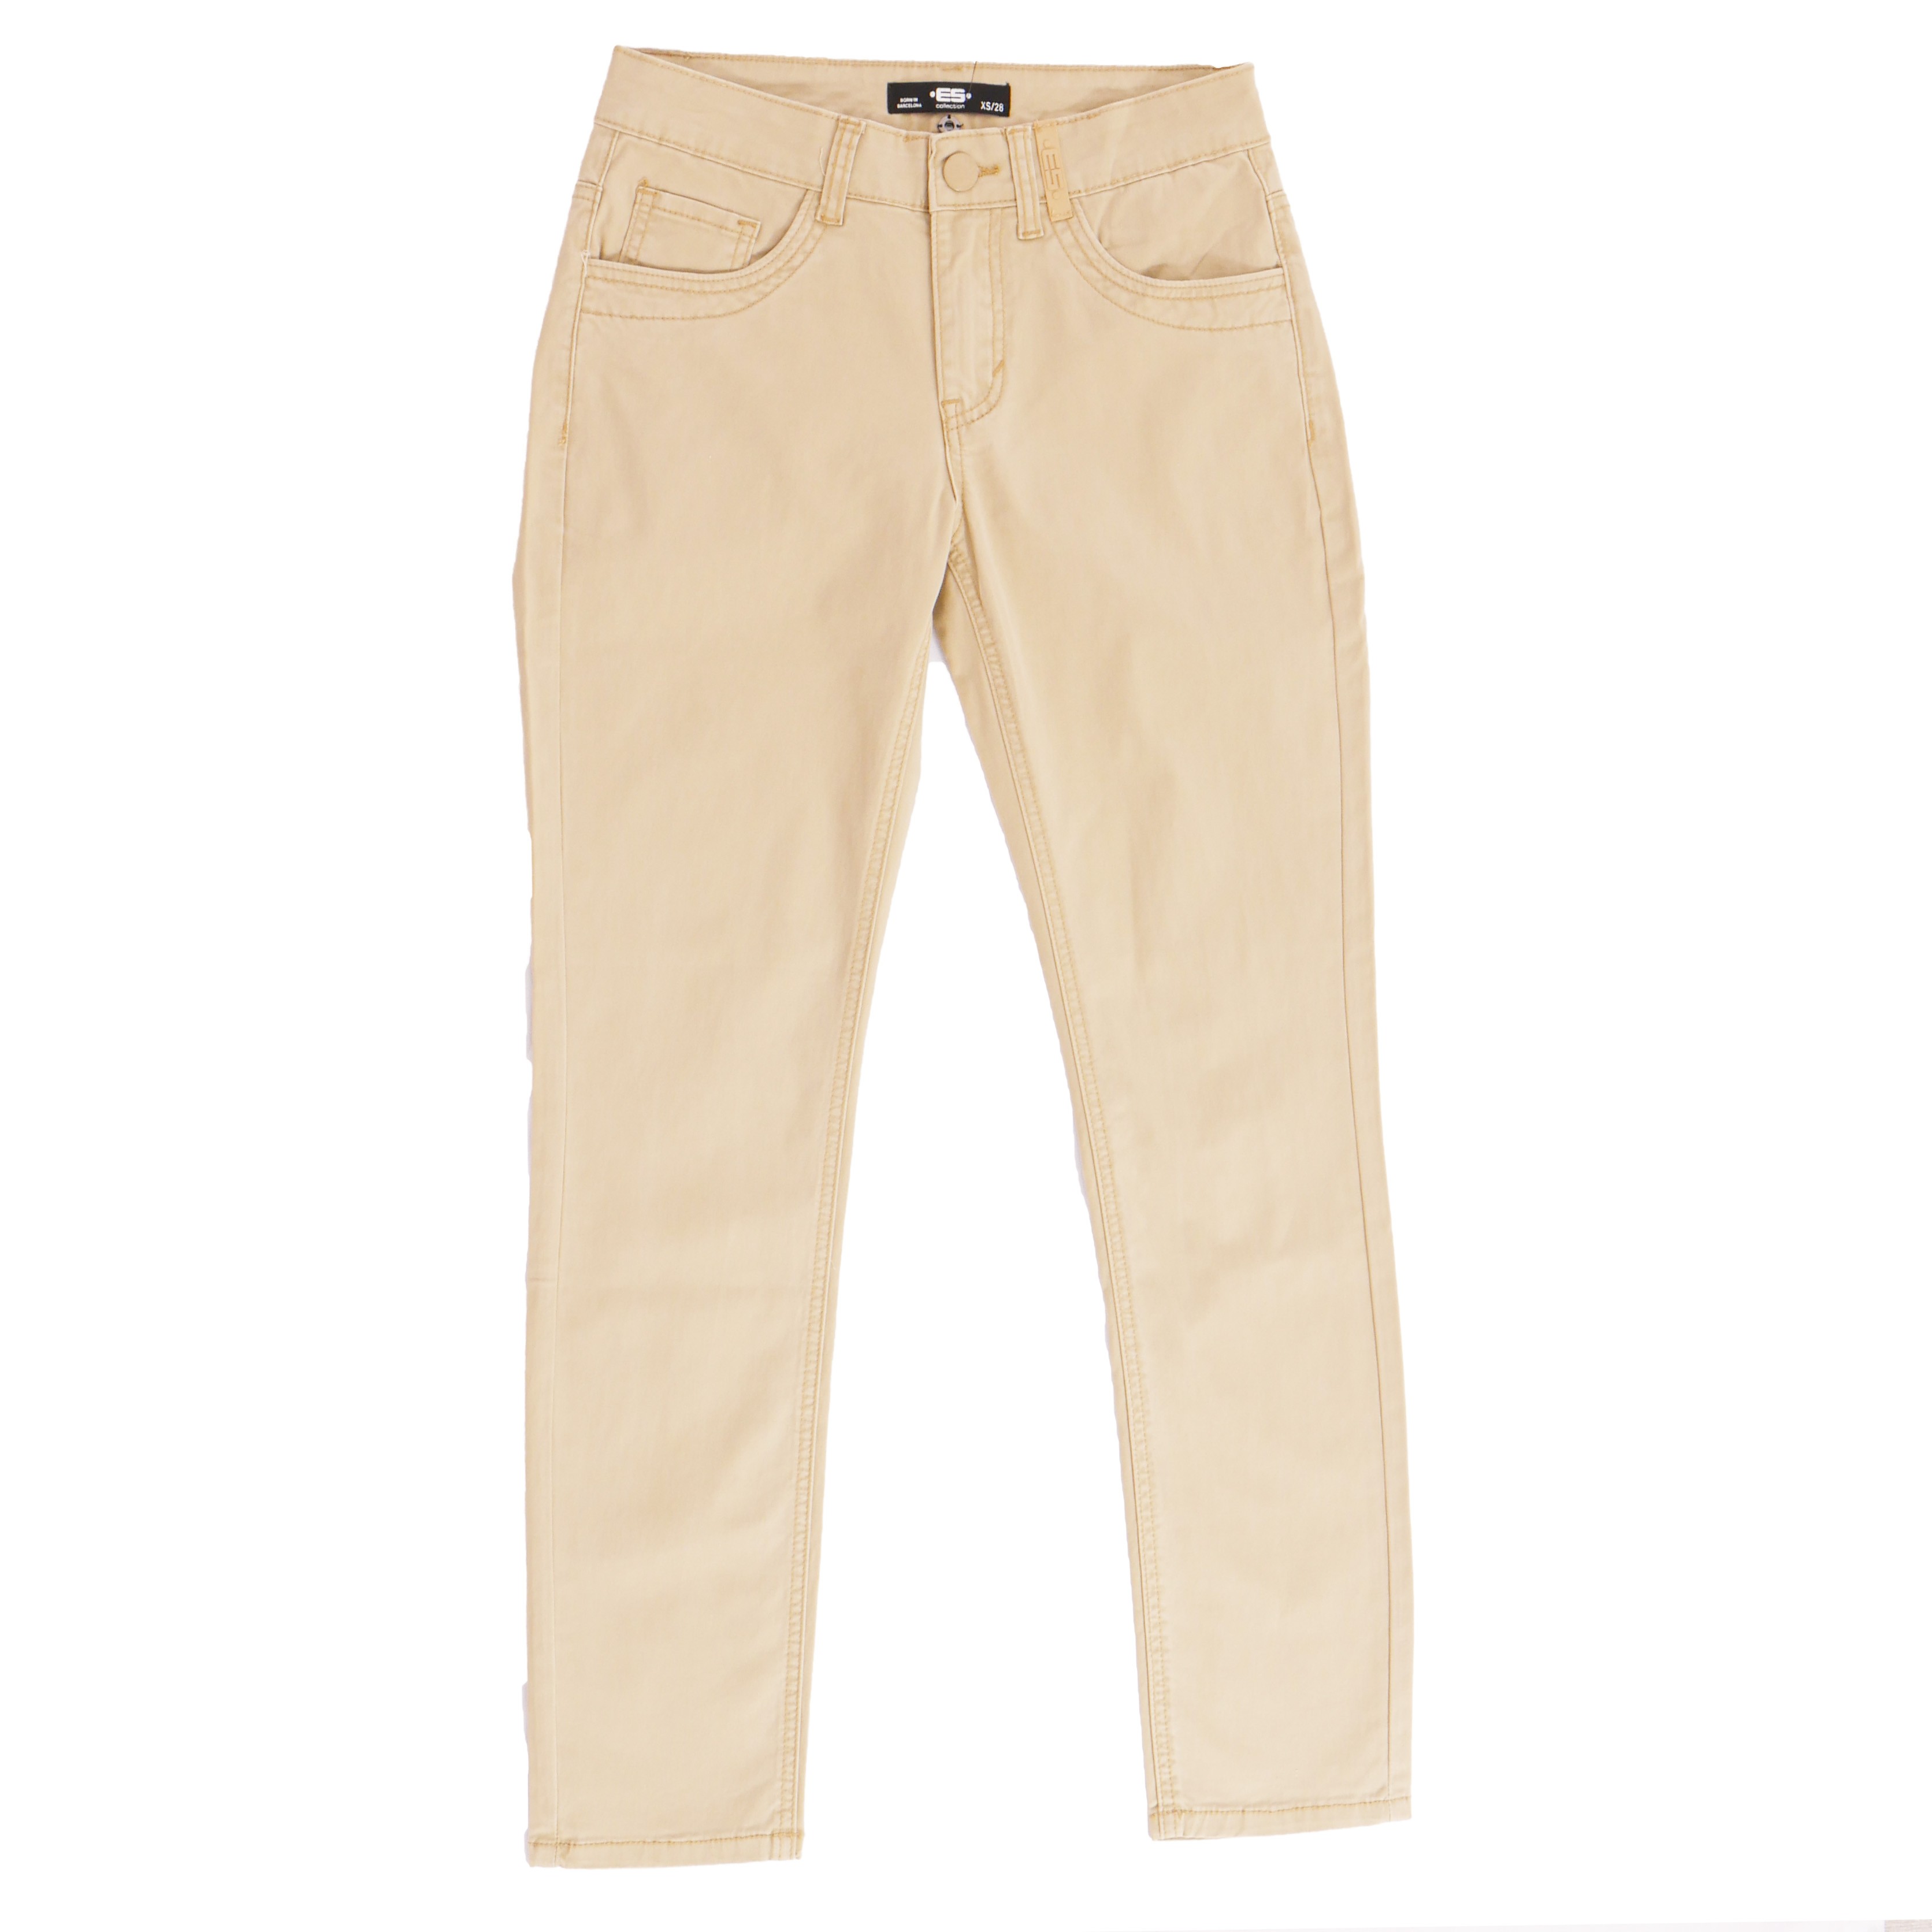 Slim - beige trousers: Pants for man brand ES collection for sale o